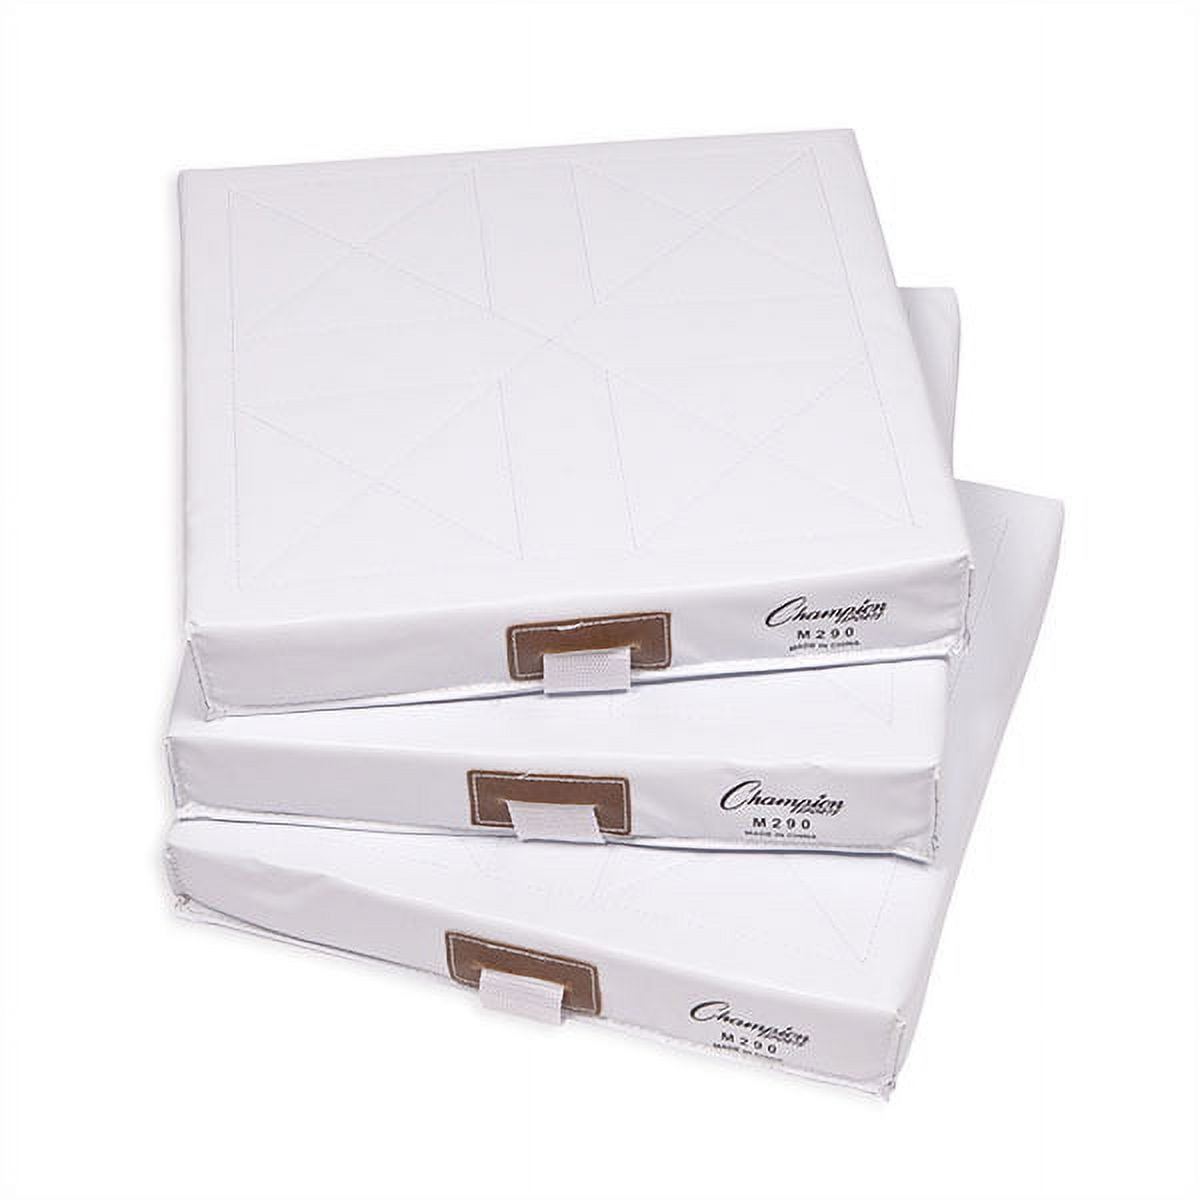 Picture of Champion Sports M290 Spike Foam Filled Quilted Cover Base Set, White - Set of 3